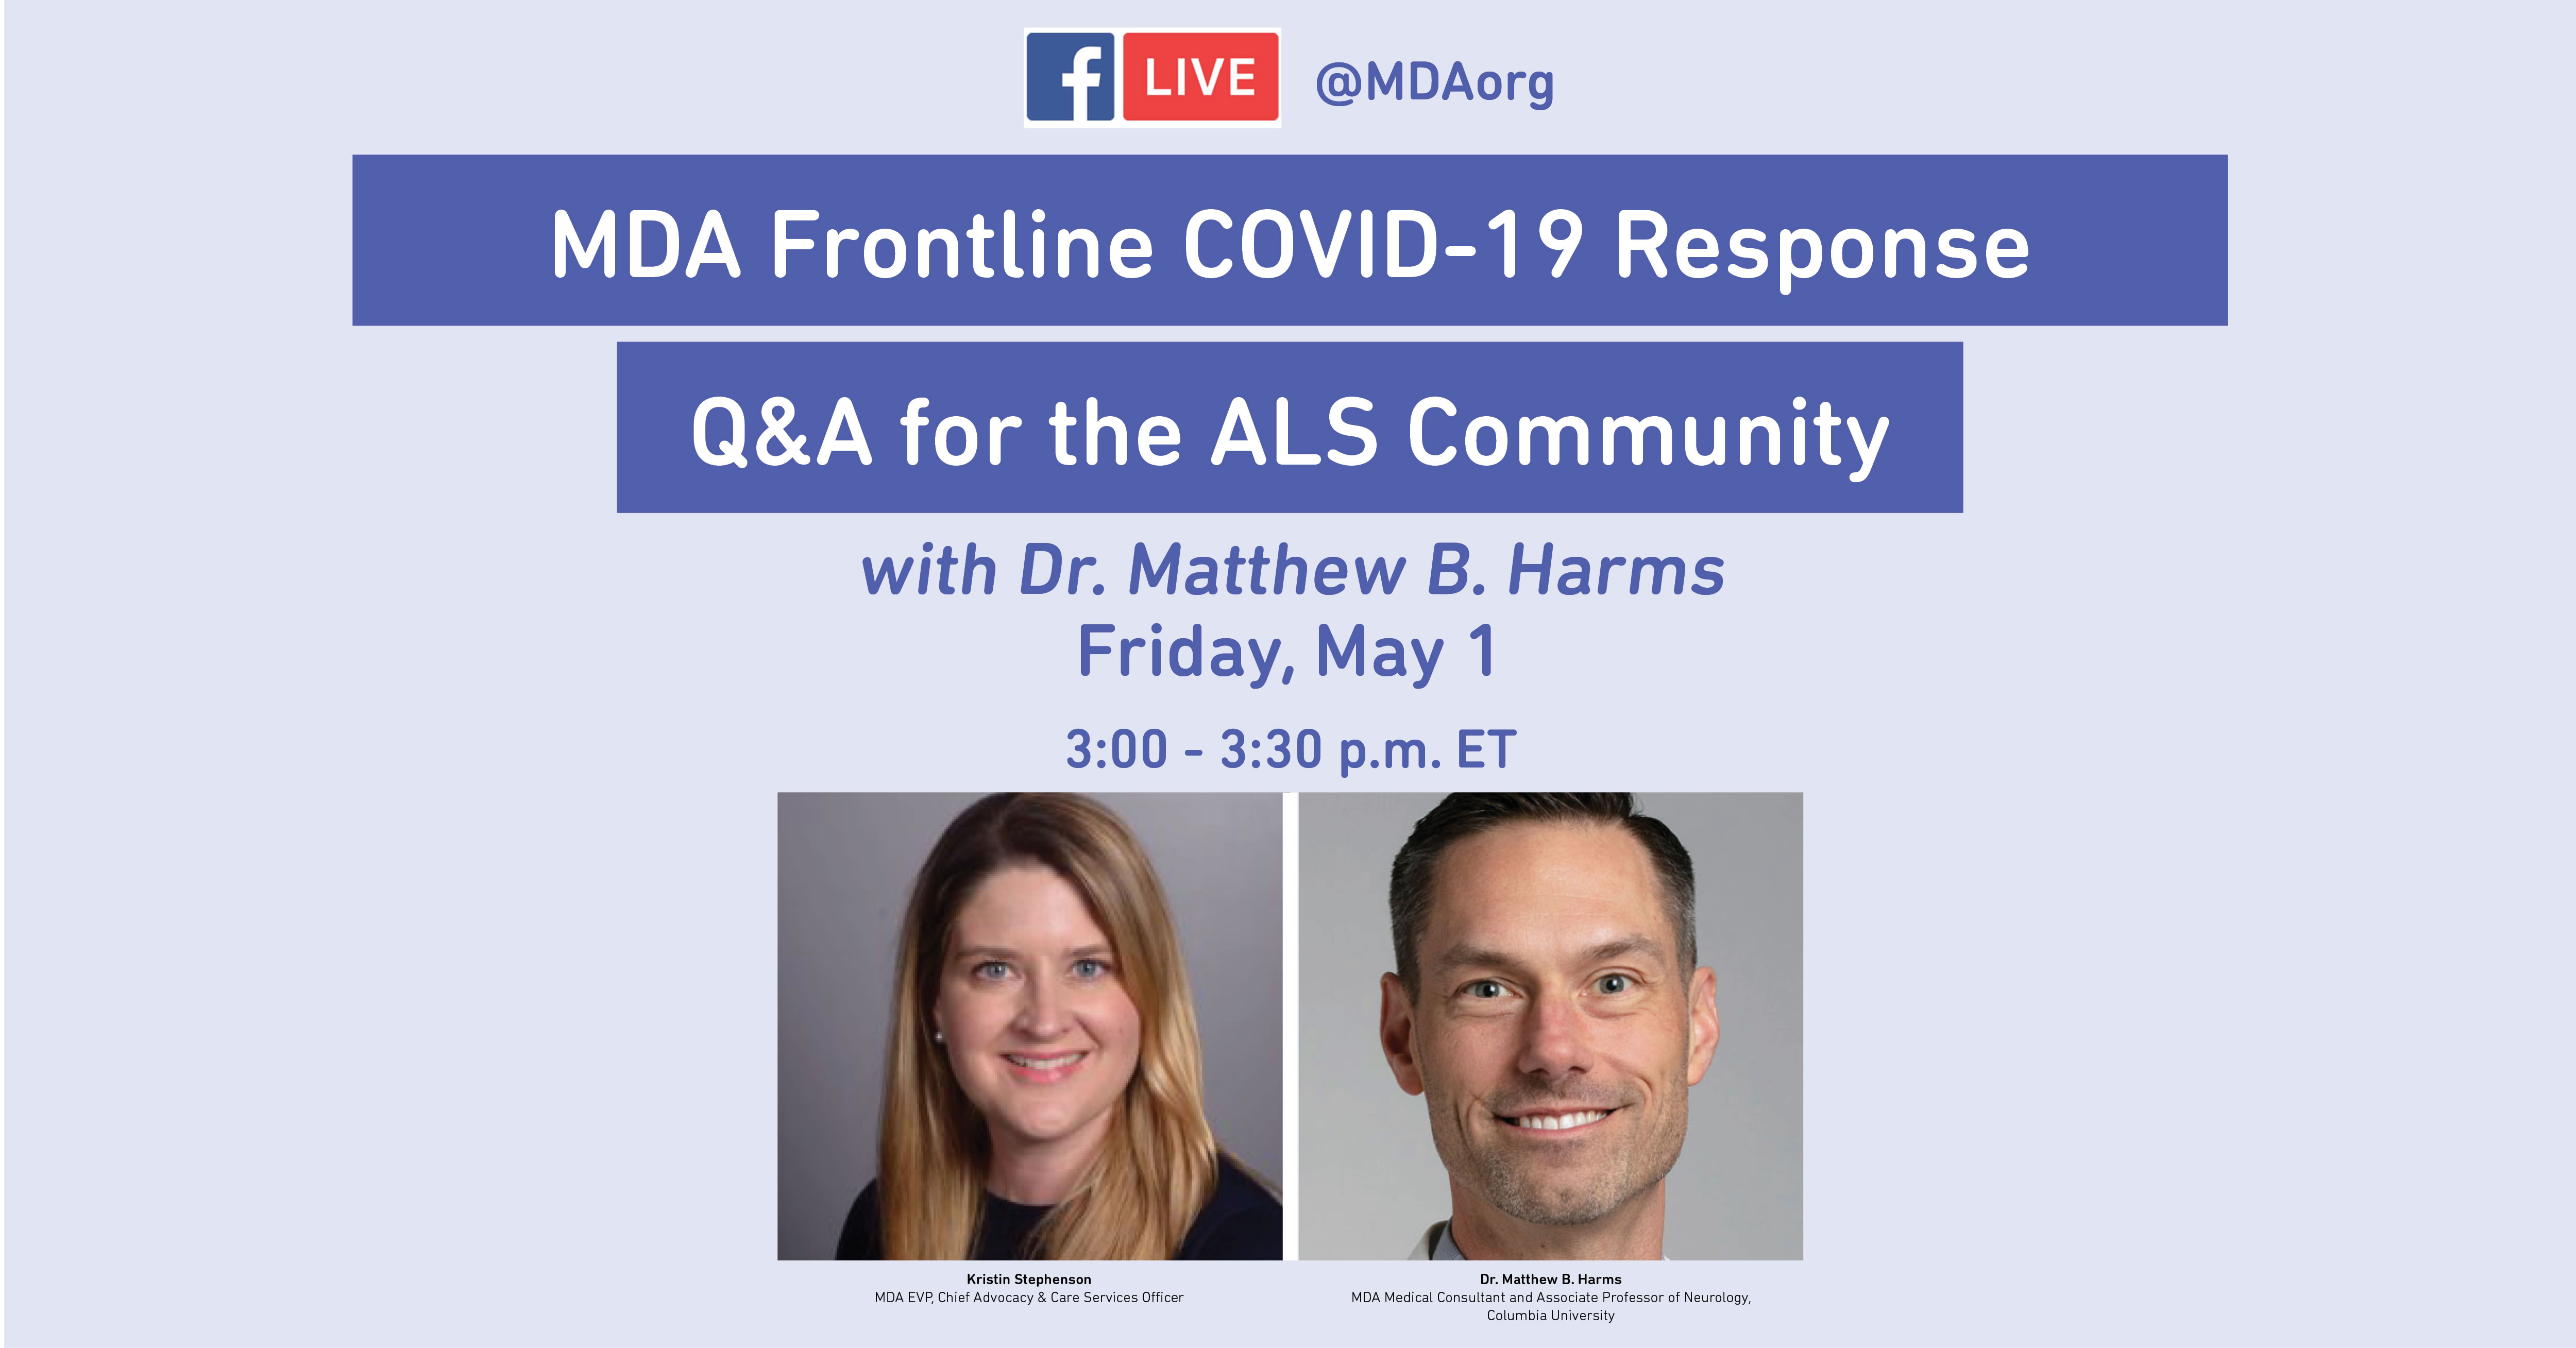 Muscular Dystrophy Association announces Facebook Live event to protect ALS community during COVID-19 pandemic, with MDA Medical Consultant Dr. Matthew B. Harms.